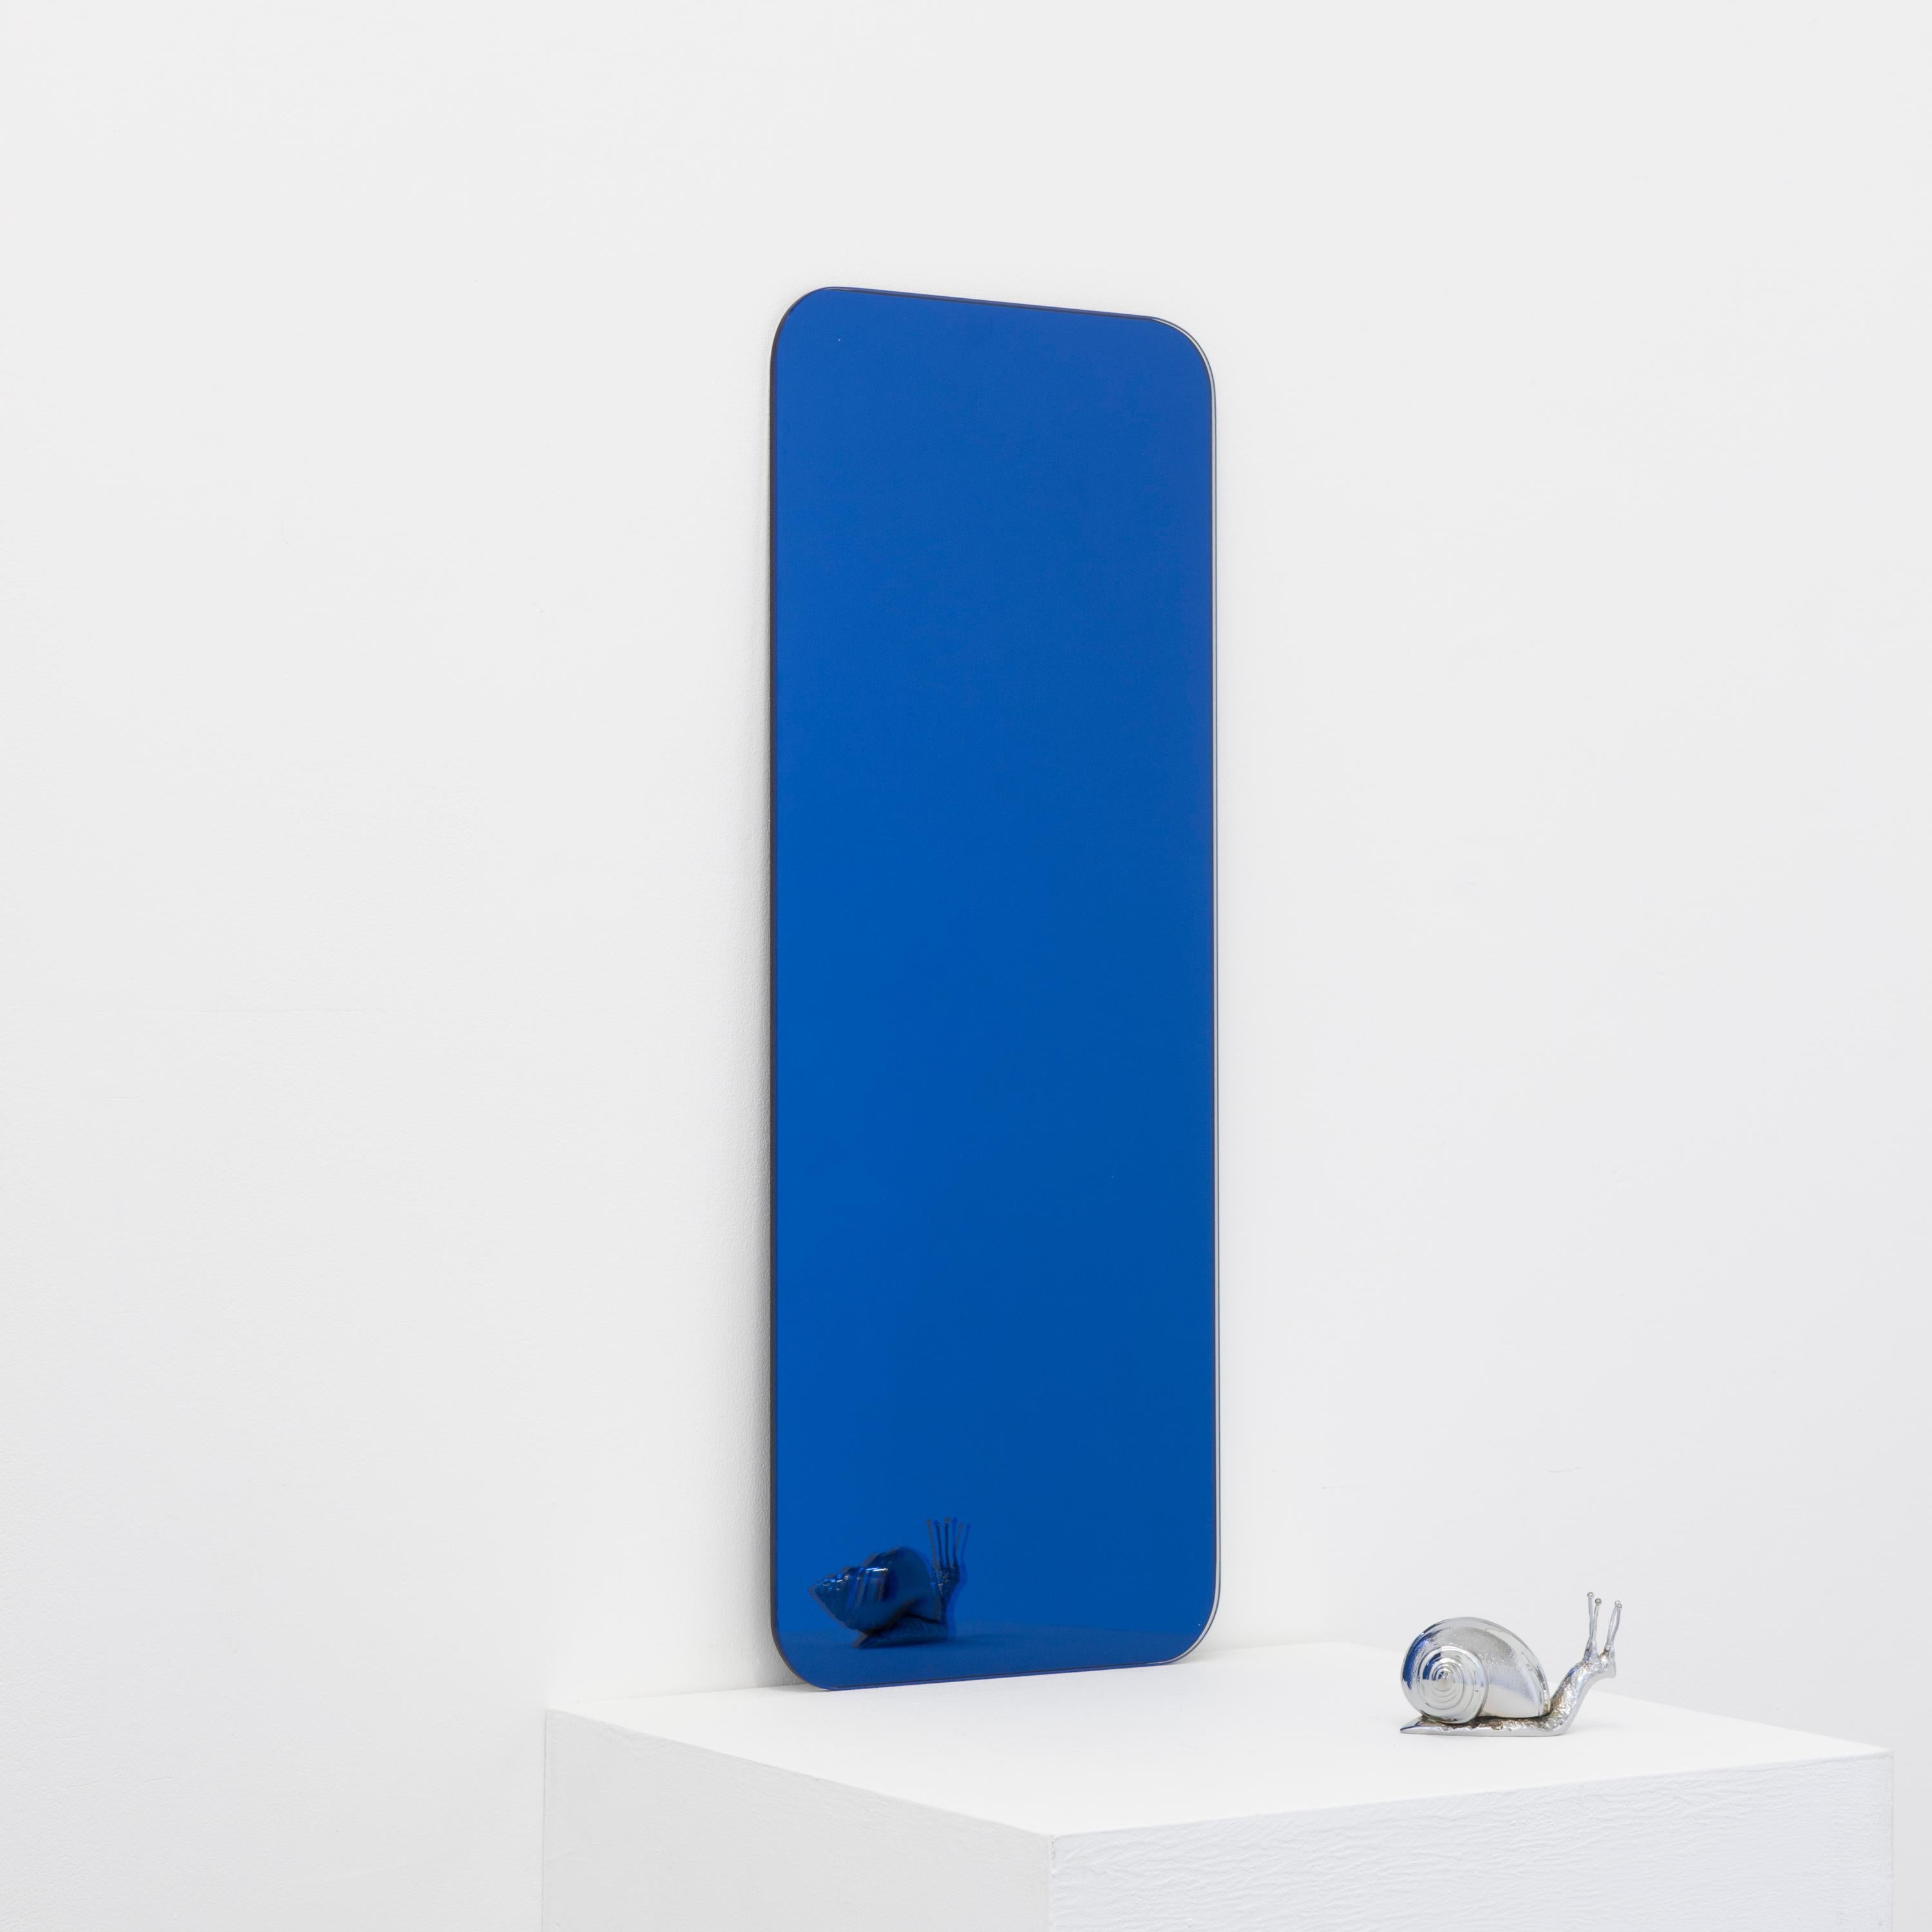 Minimalist rectangular shaped frameless blue tinted mirror with a floating effect. Quality design that ensures the mirror sits perfectly parallel to the wall. Designed and made in London, UK.

Fitted with professional plates not visible once